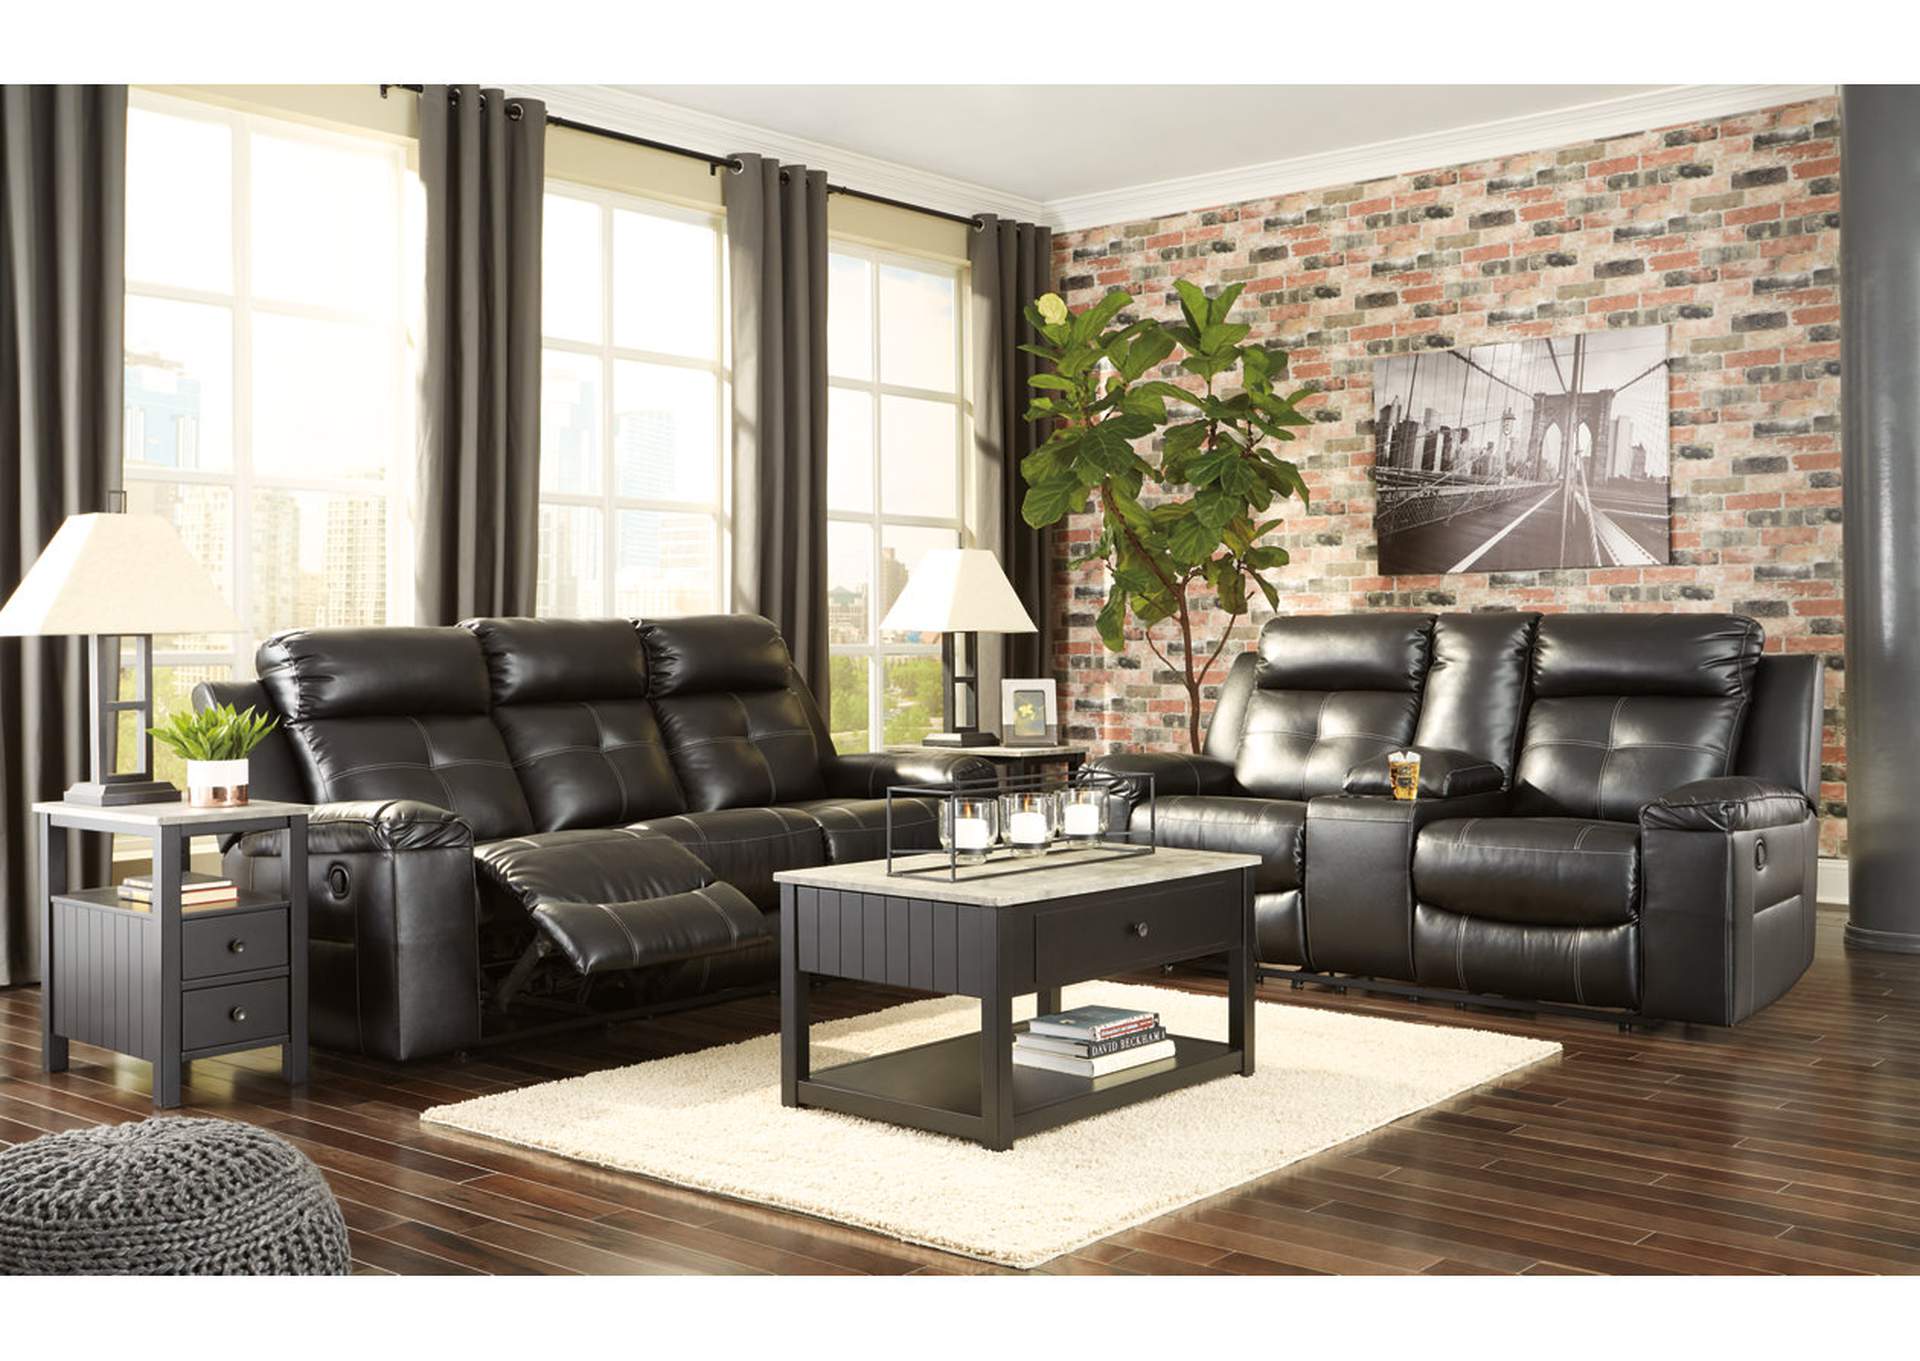 Kempten Sofa and Loveseat,Signature Design By Ashley